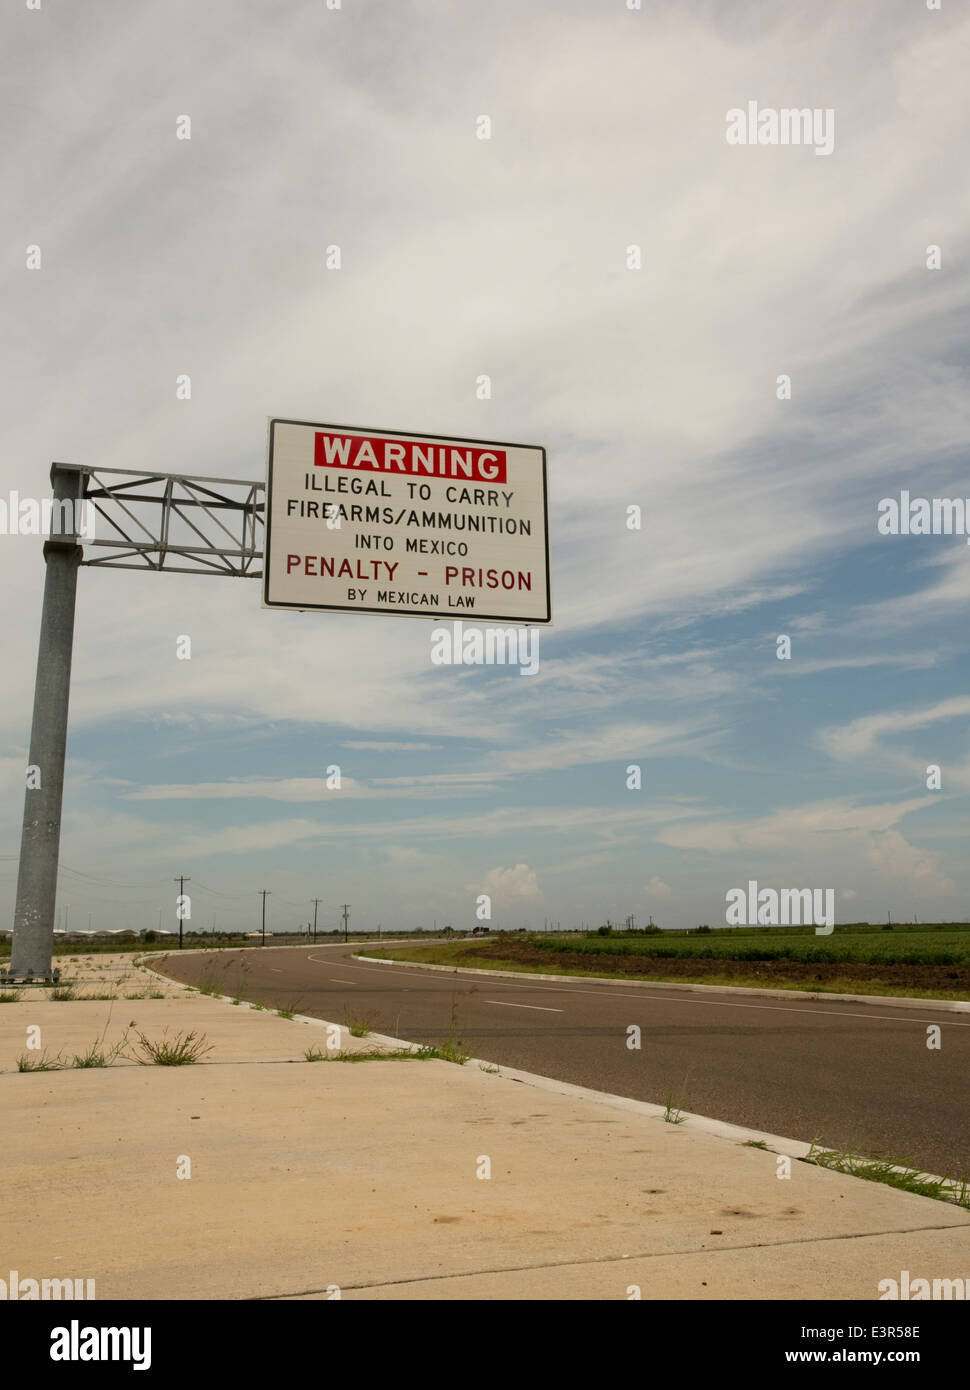 Large sign warns that it is illegal to carry firearms and ammunition into Mexico stating that penalty is prison by Mexican law. Stock Photo